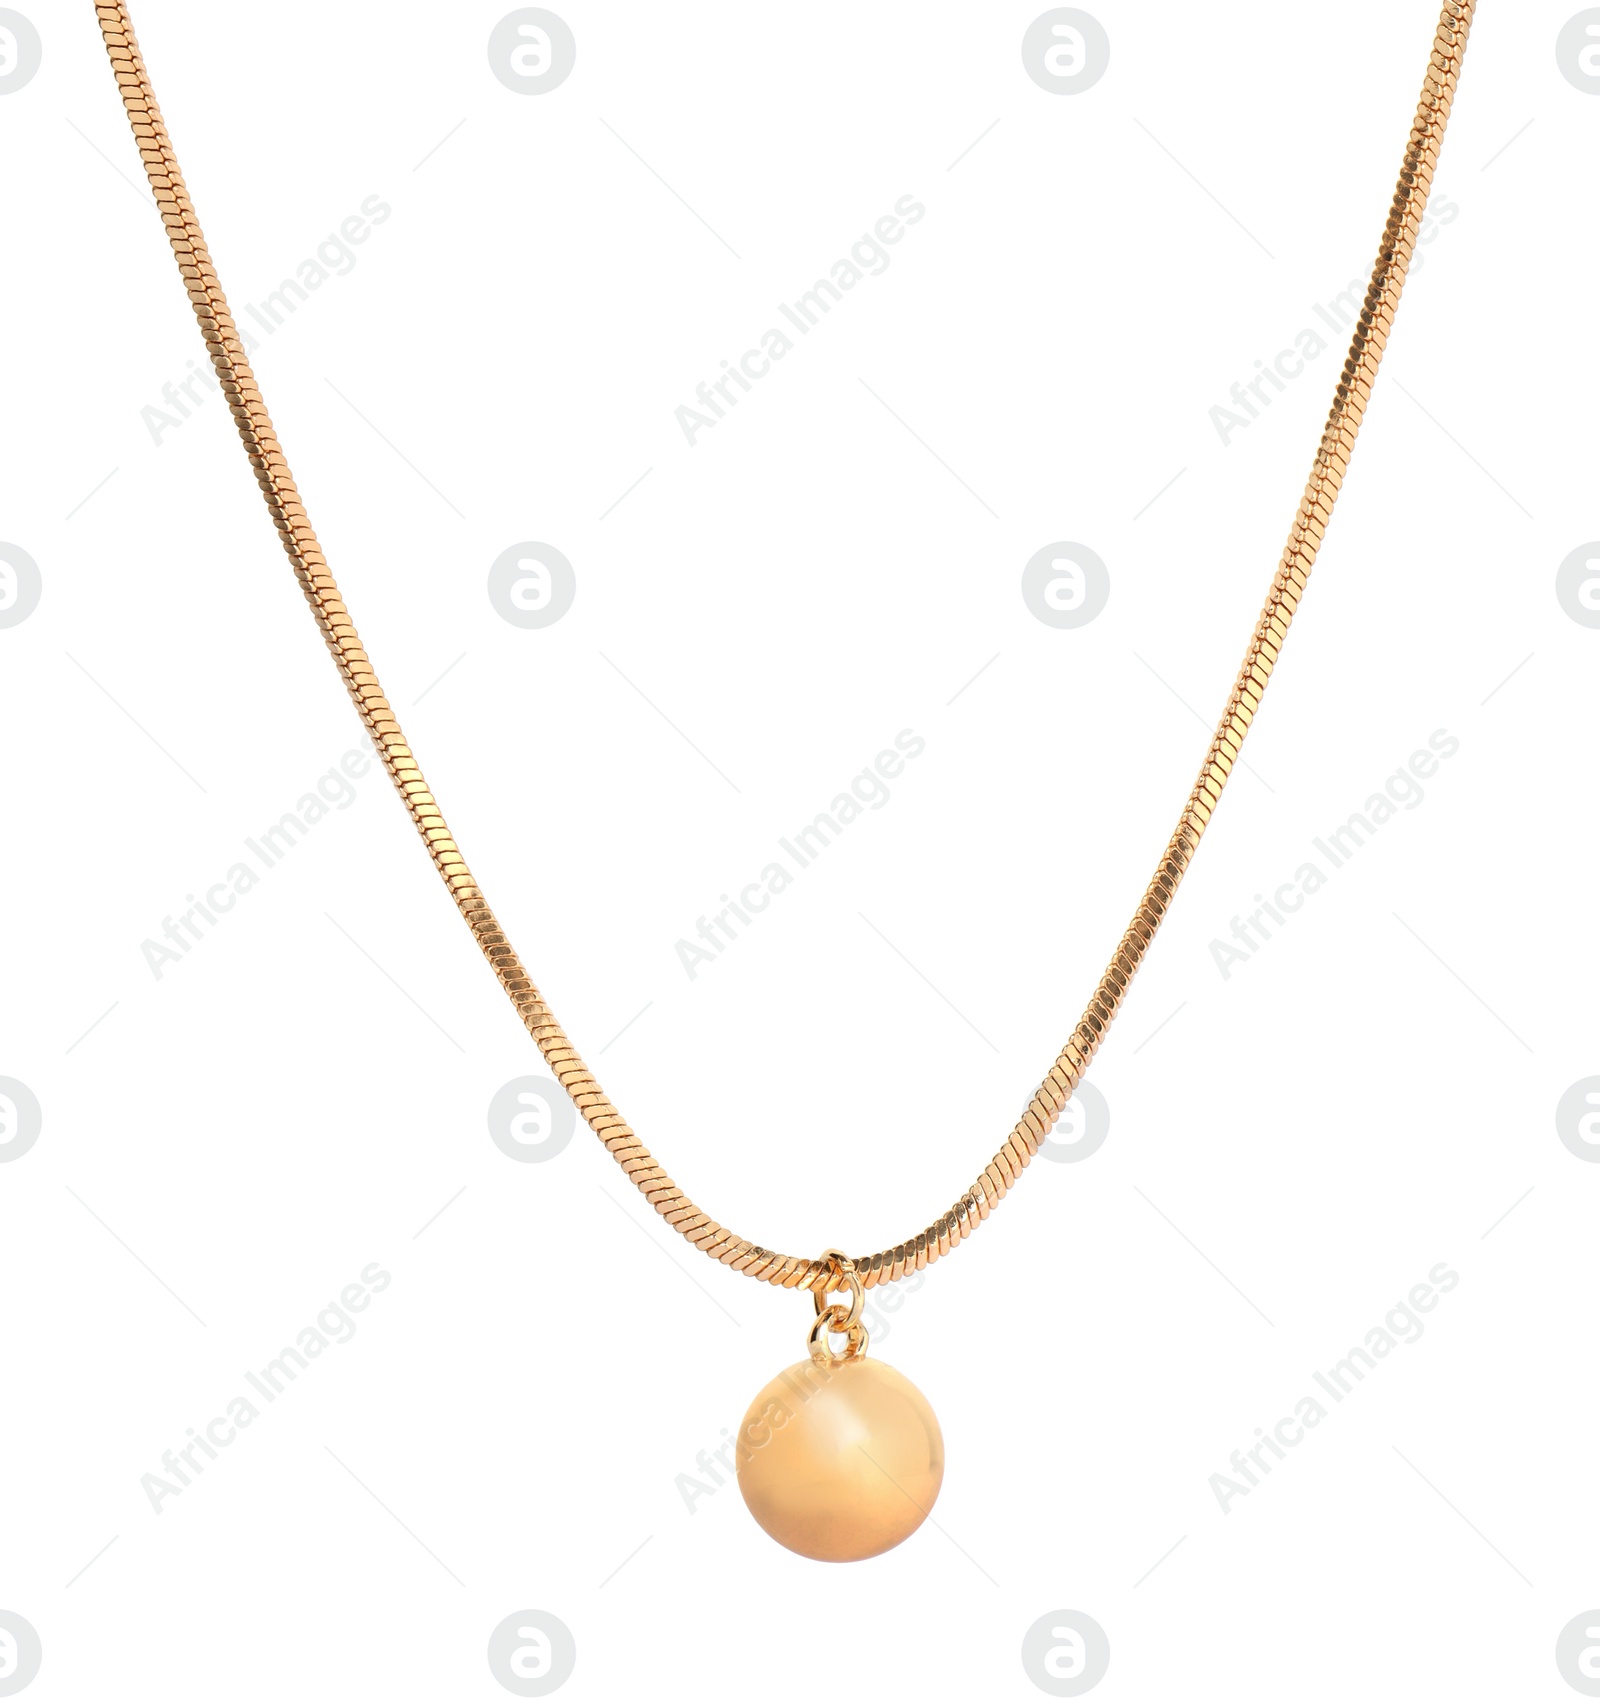 Photo of One metal chain with pendant isolated on white. Luxury jewelry